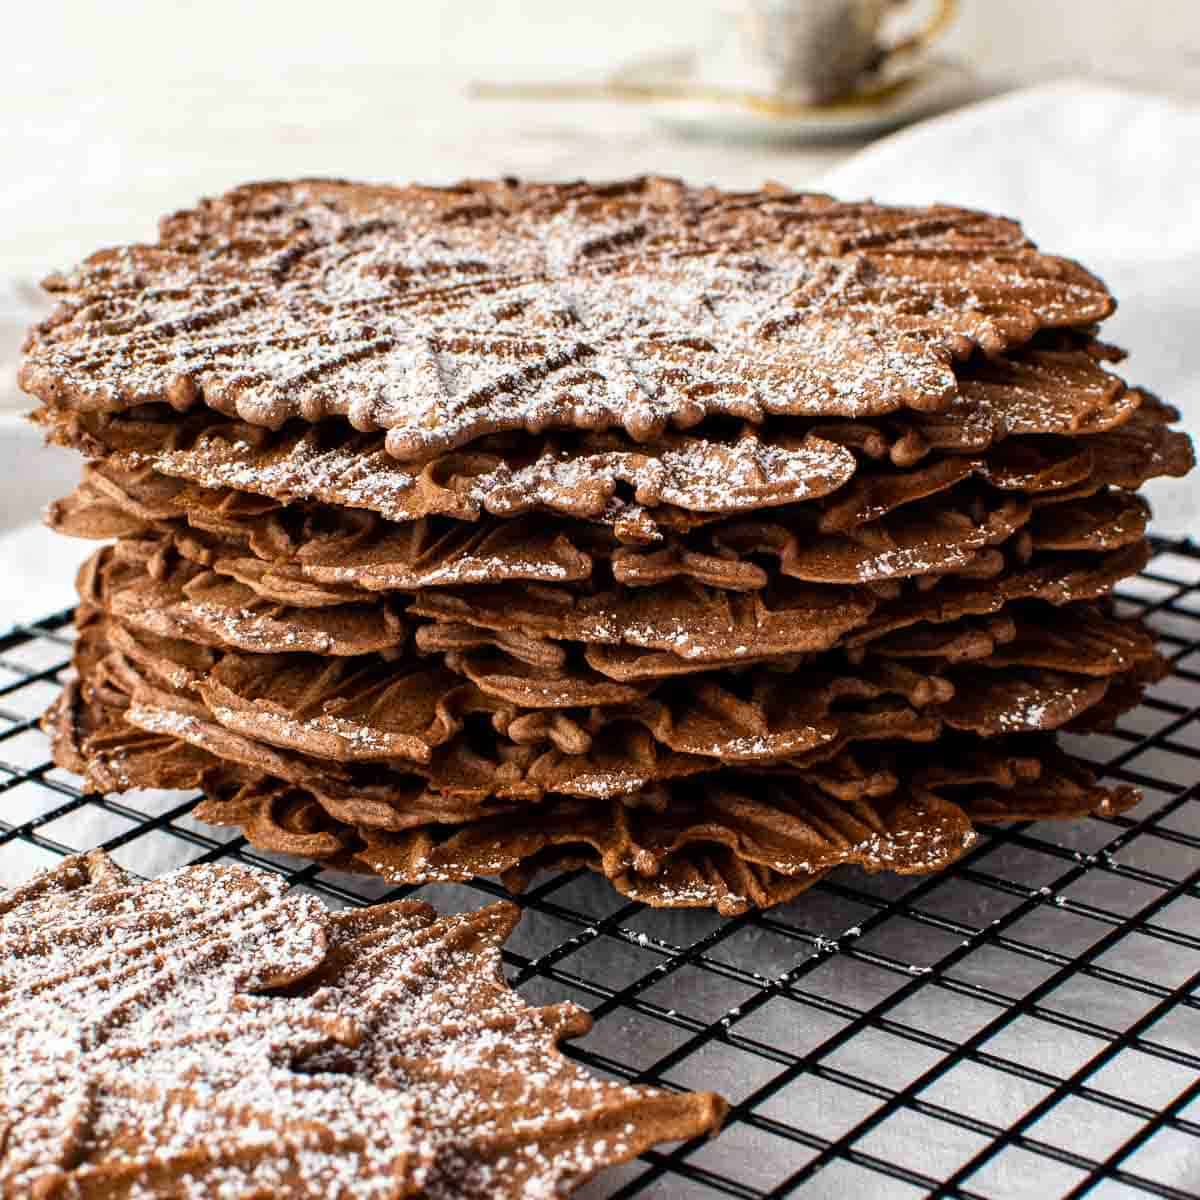 stack of chocolate wafer cookies on black wire rack.